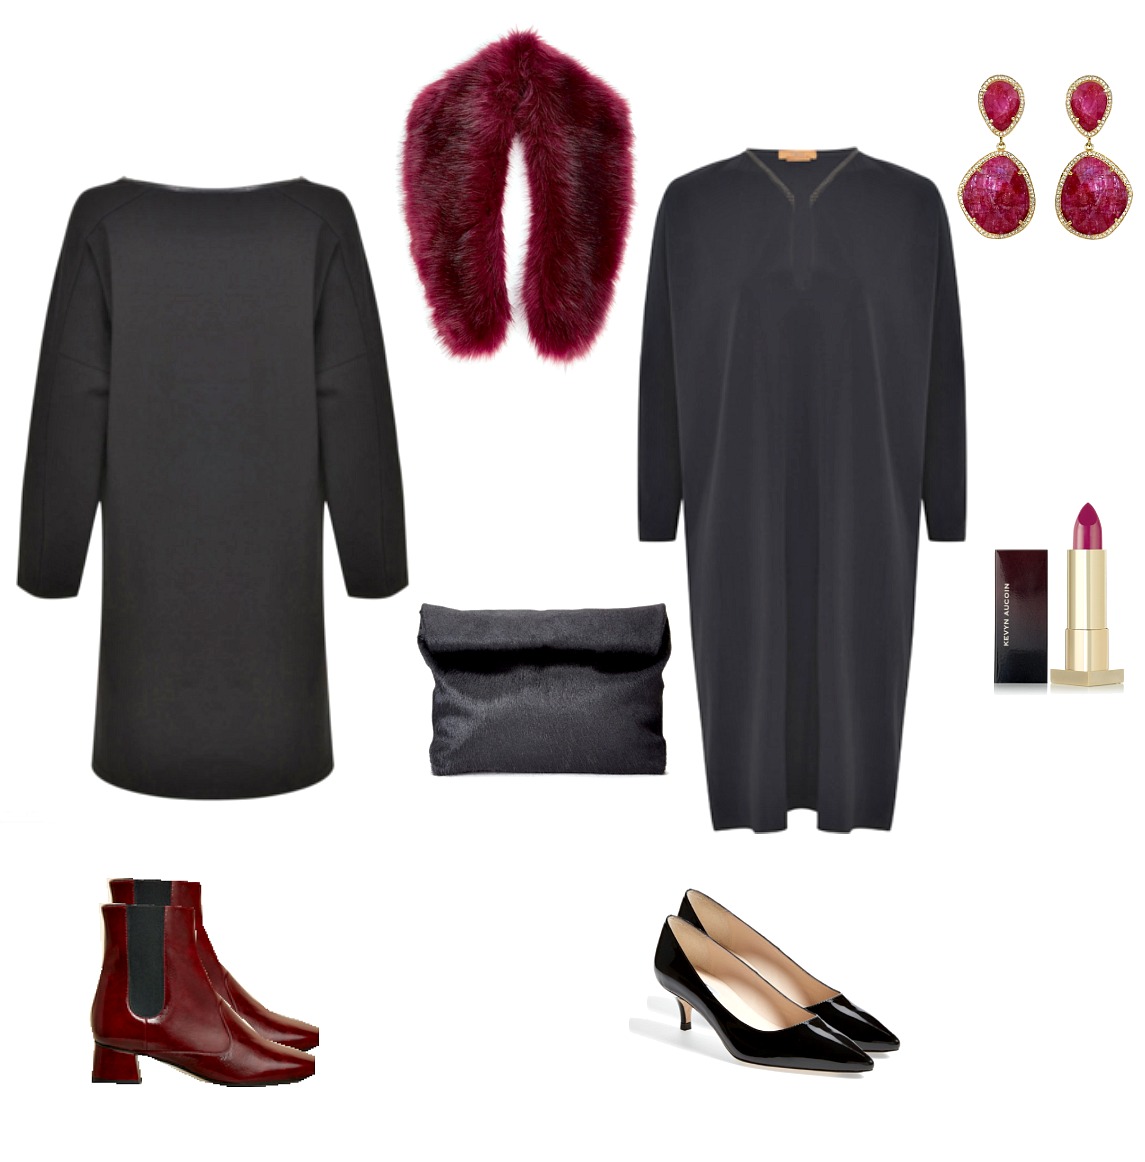 hope-dresses-with-burgundy-accessories